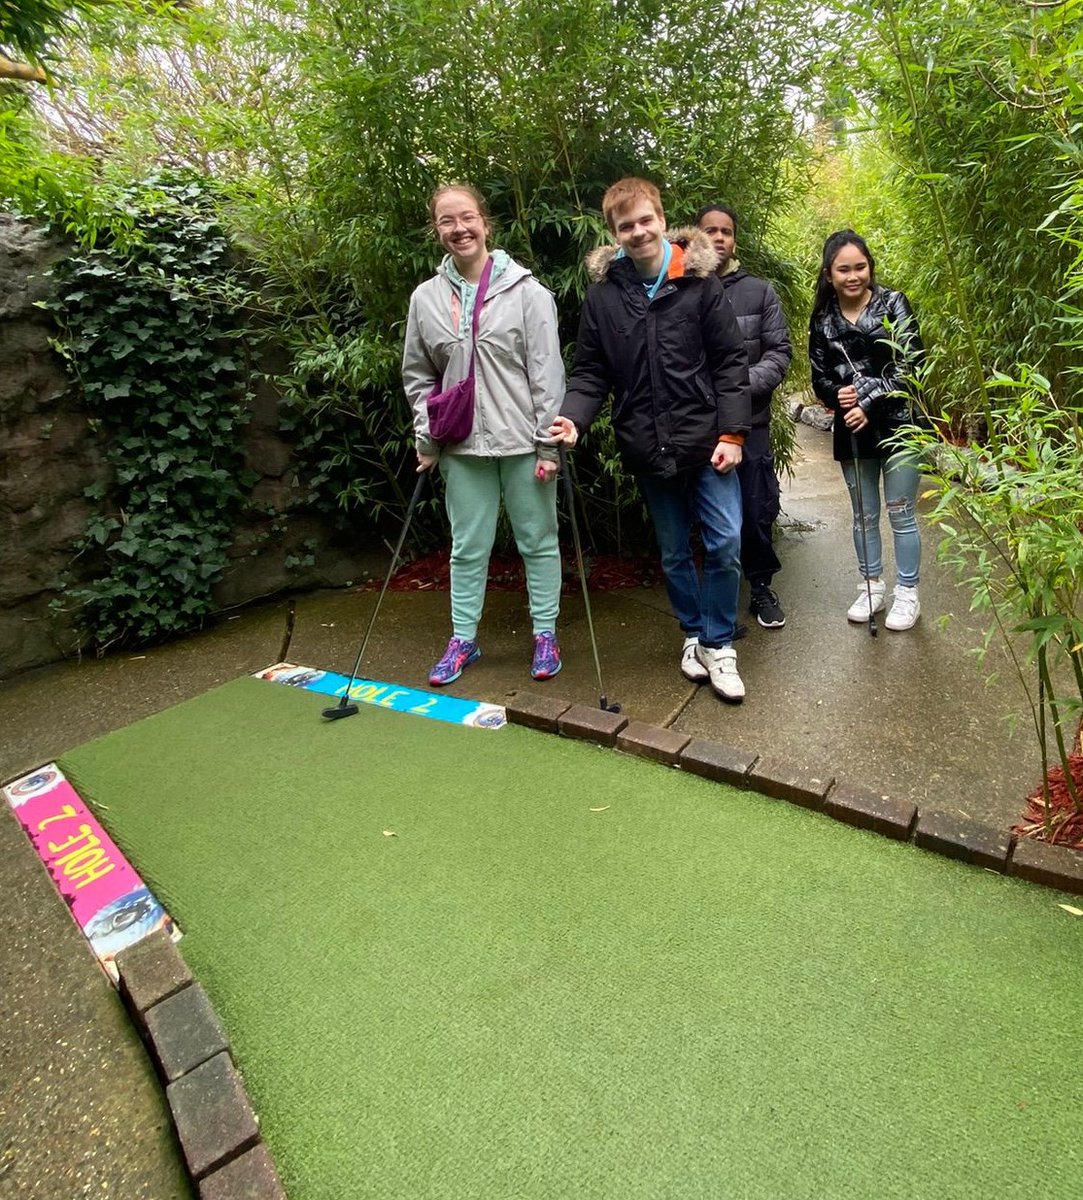 Mini golf ⛳️@JENewMalden 🏌️‍♀️🏌️‍♂️was the perfect way to spend the Easter break with some of our BuddyUp group. We had a great time showcasing our golfing skills & bonding with each other. Can't wait for the next adventure with this amazing group! #BuddyUp #MiniGolf #EasterBreakFun